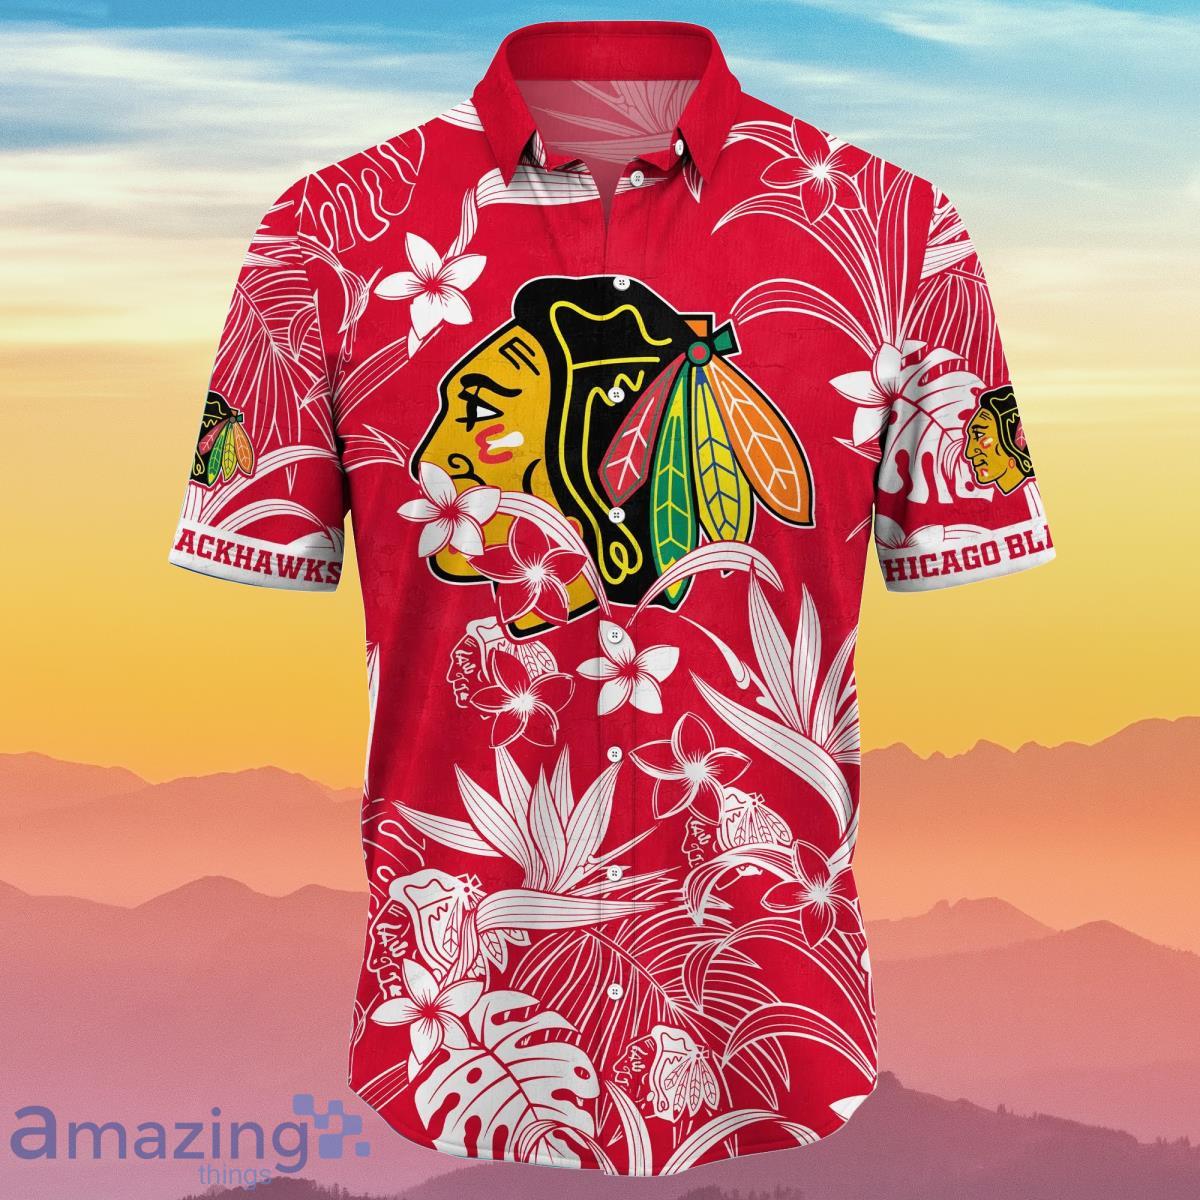 The perfect holiday gifts for the Chicago Blackhawks fan